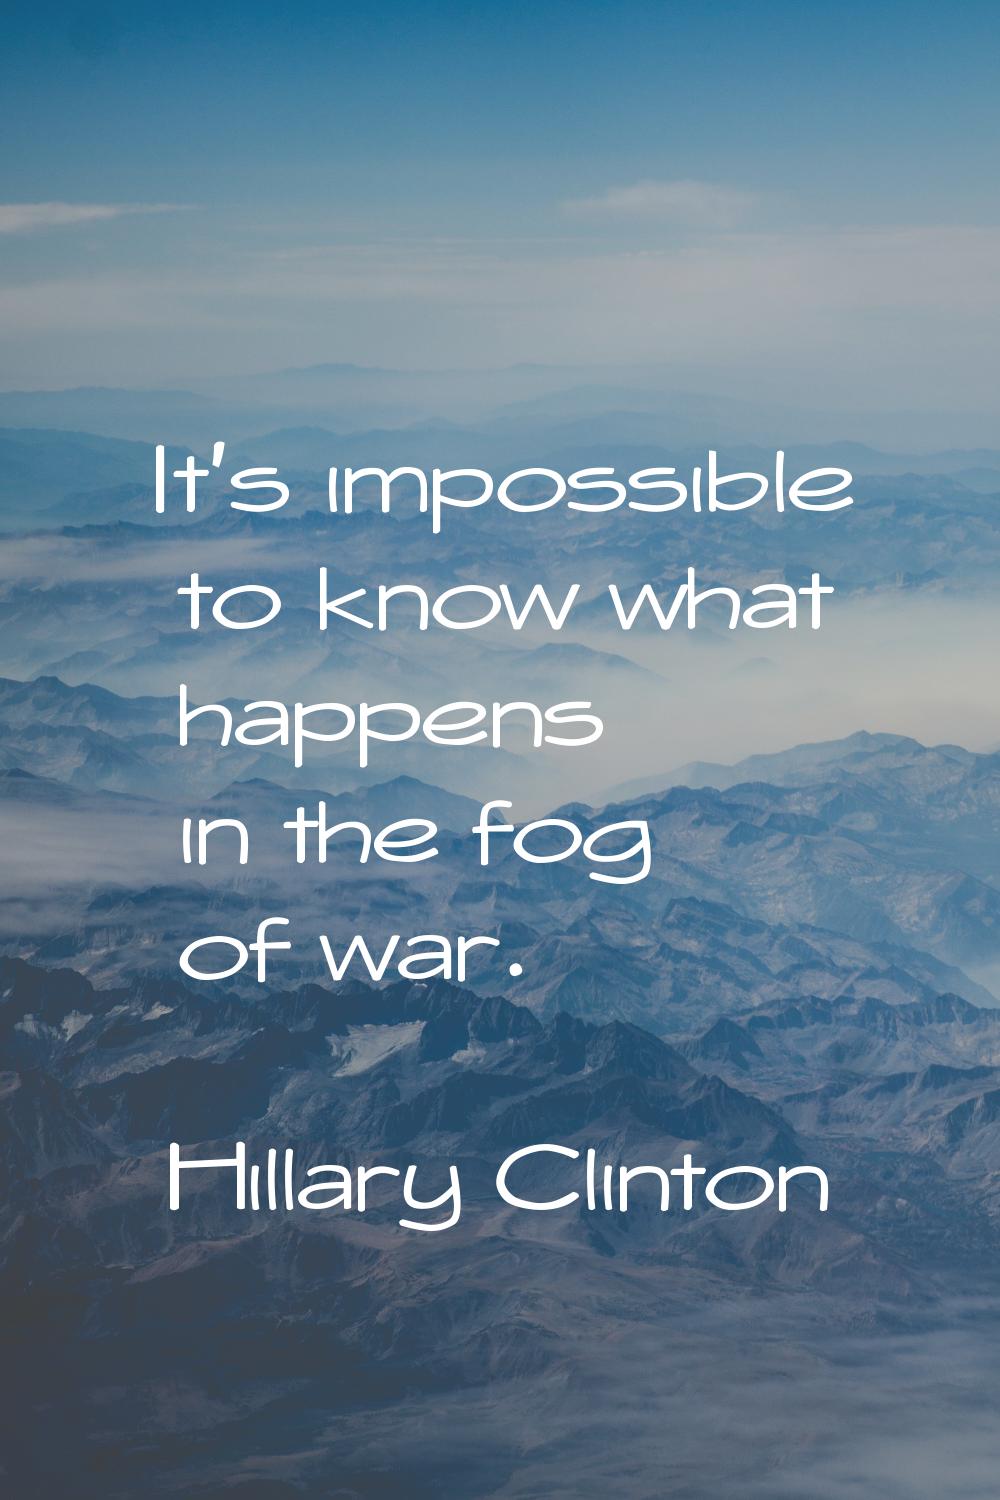 It's impossible to know what happens in the fog of war.